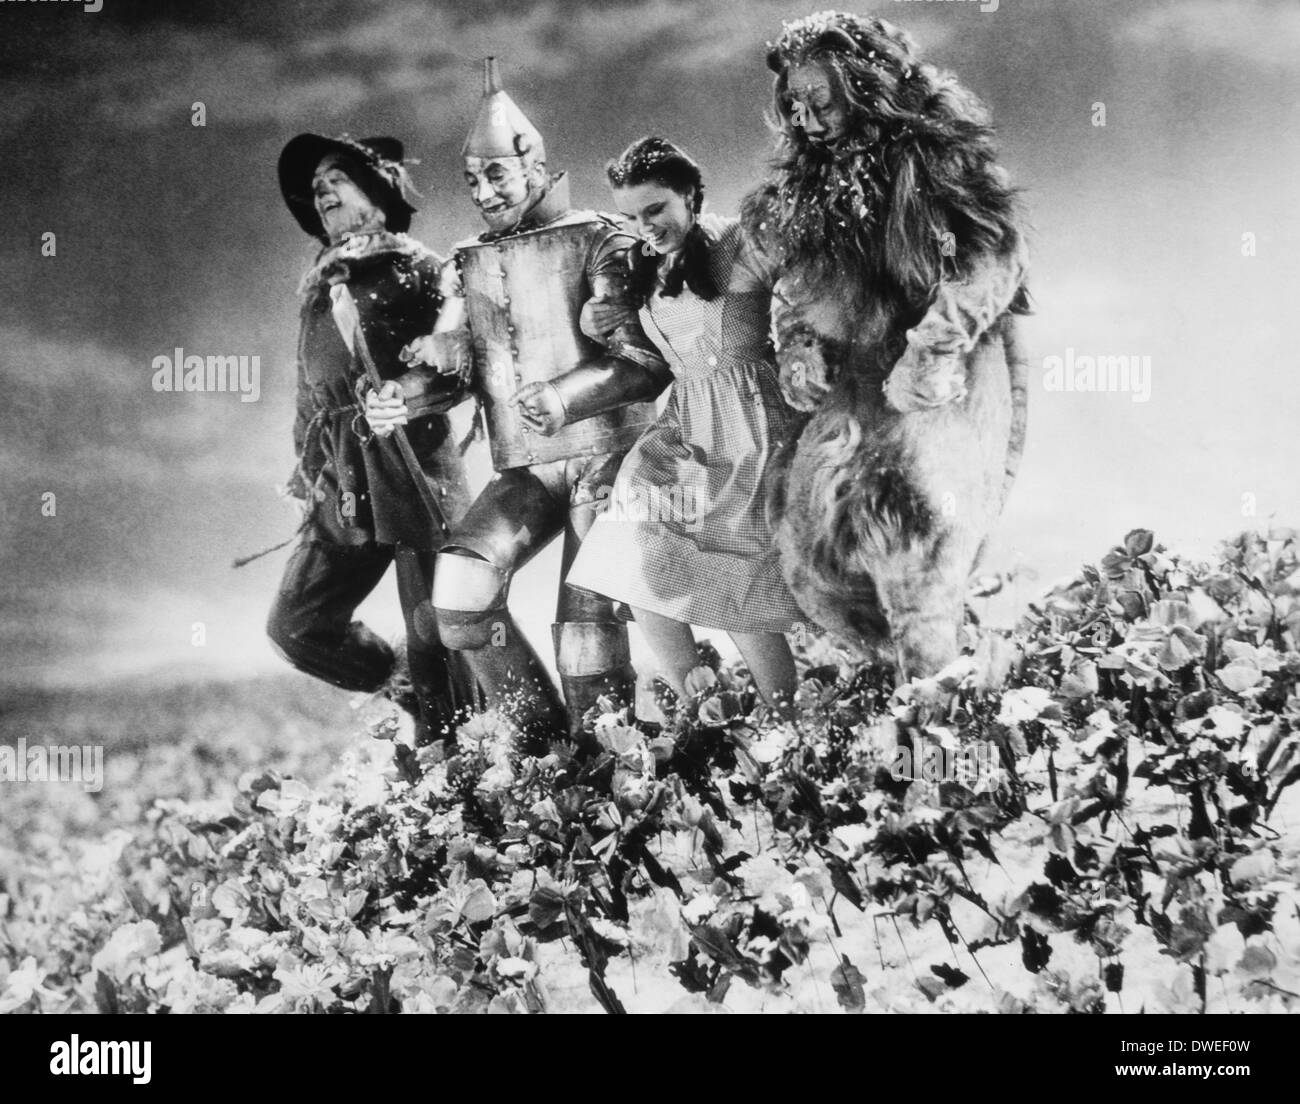 Judy Garland, Ray Bolger, Bert Lahr and Jack Haley, on-set of the Film, 'The Wizard of Oz', 1939 Stock Photo